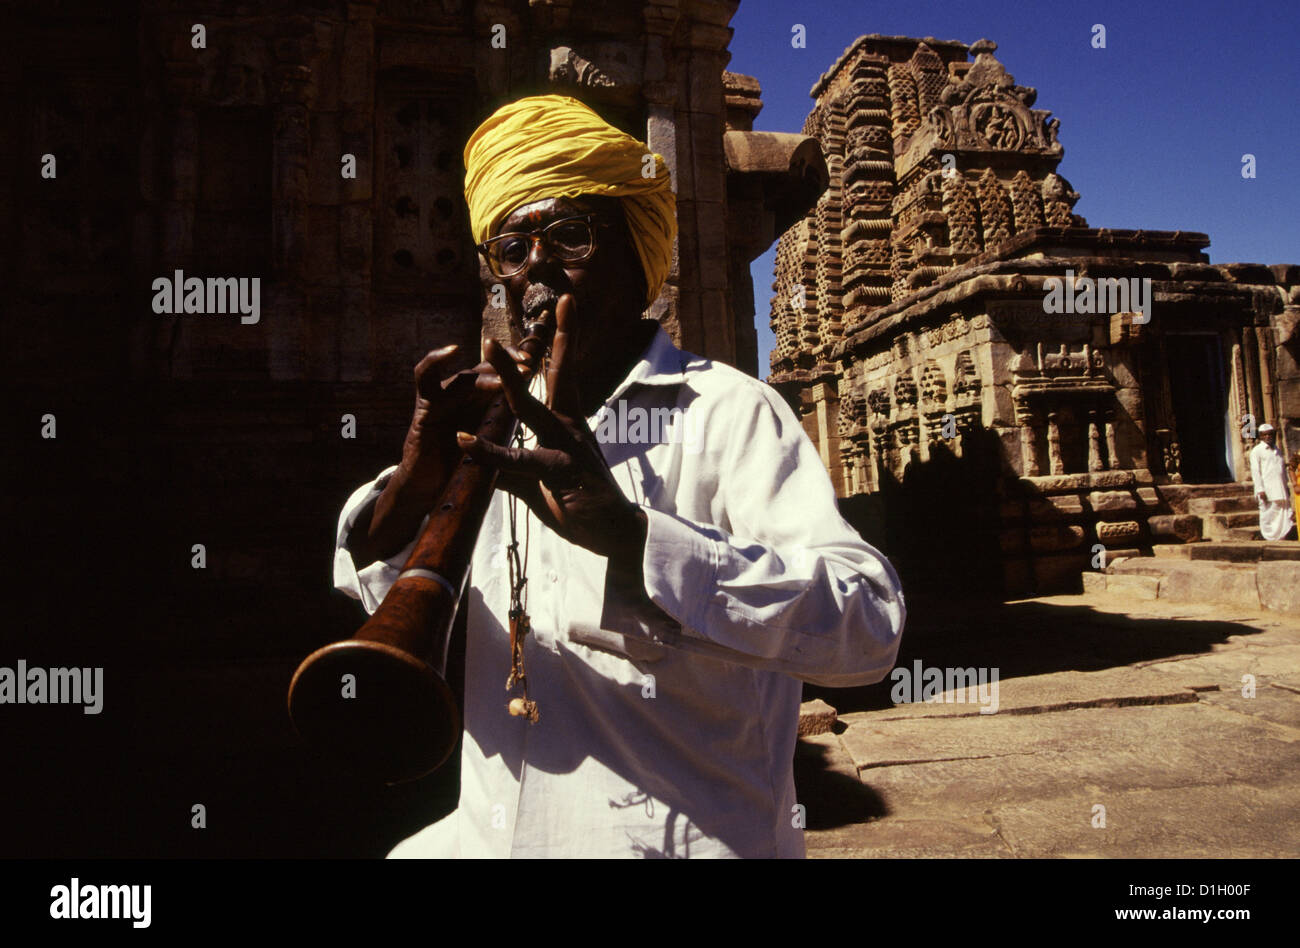 Man playing the Shehnai musical instrument during a religious procession amid the ruins of 8th century Chalukya monuments in Pattadakal, also spelled Paṭṭadakallu in Karnataka state India Stock Photo